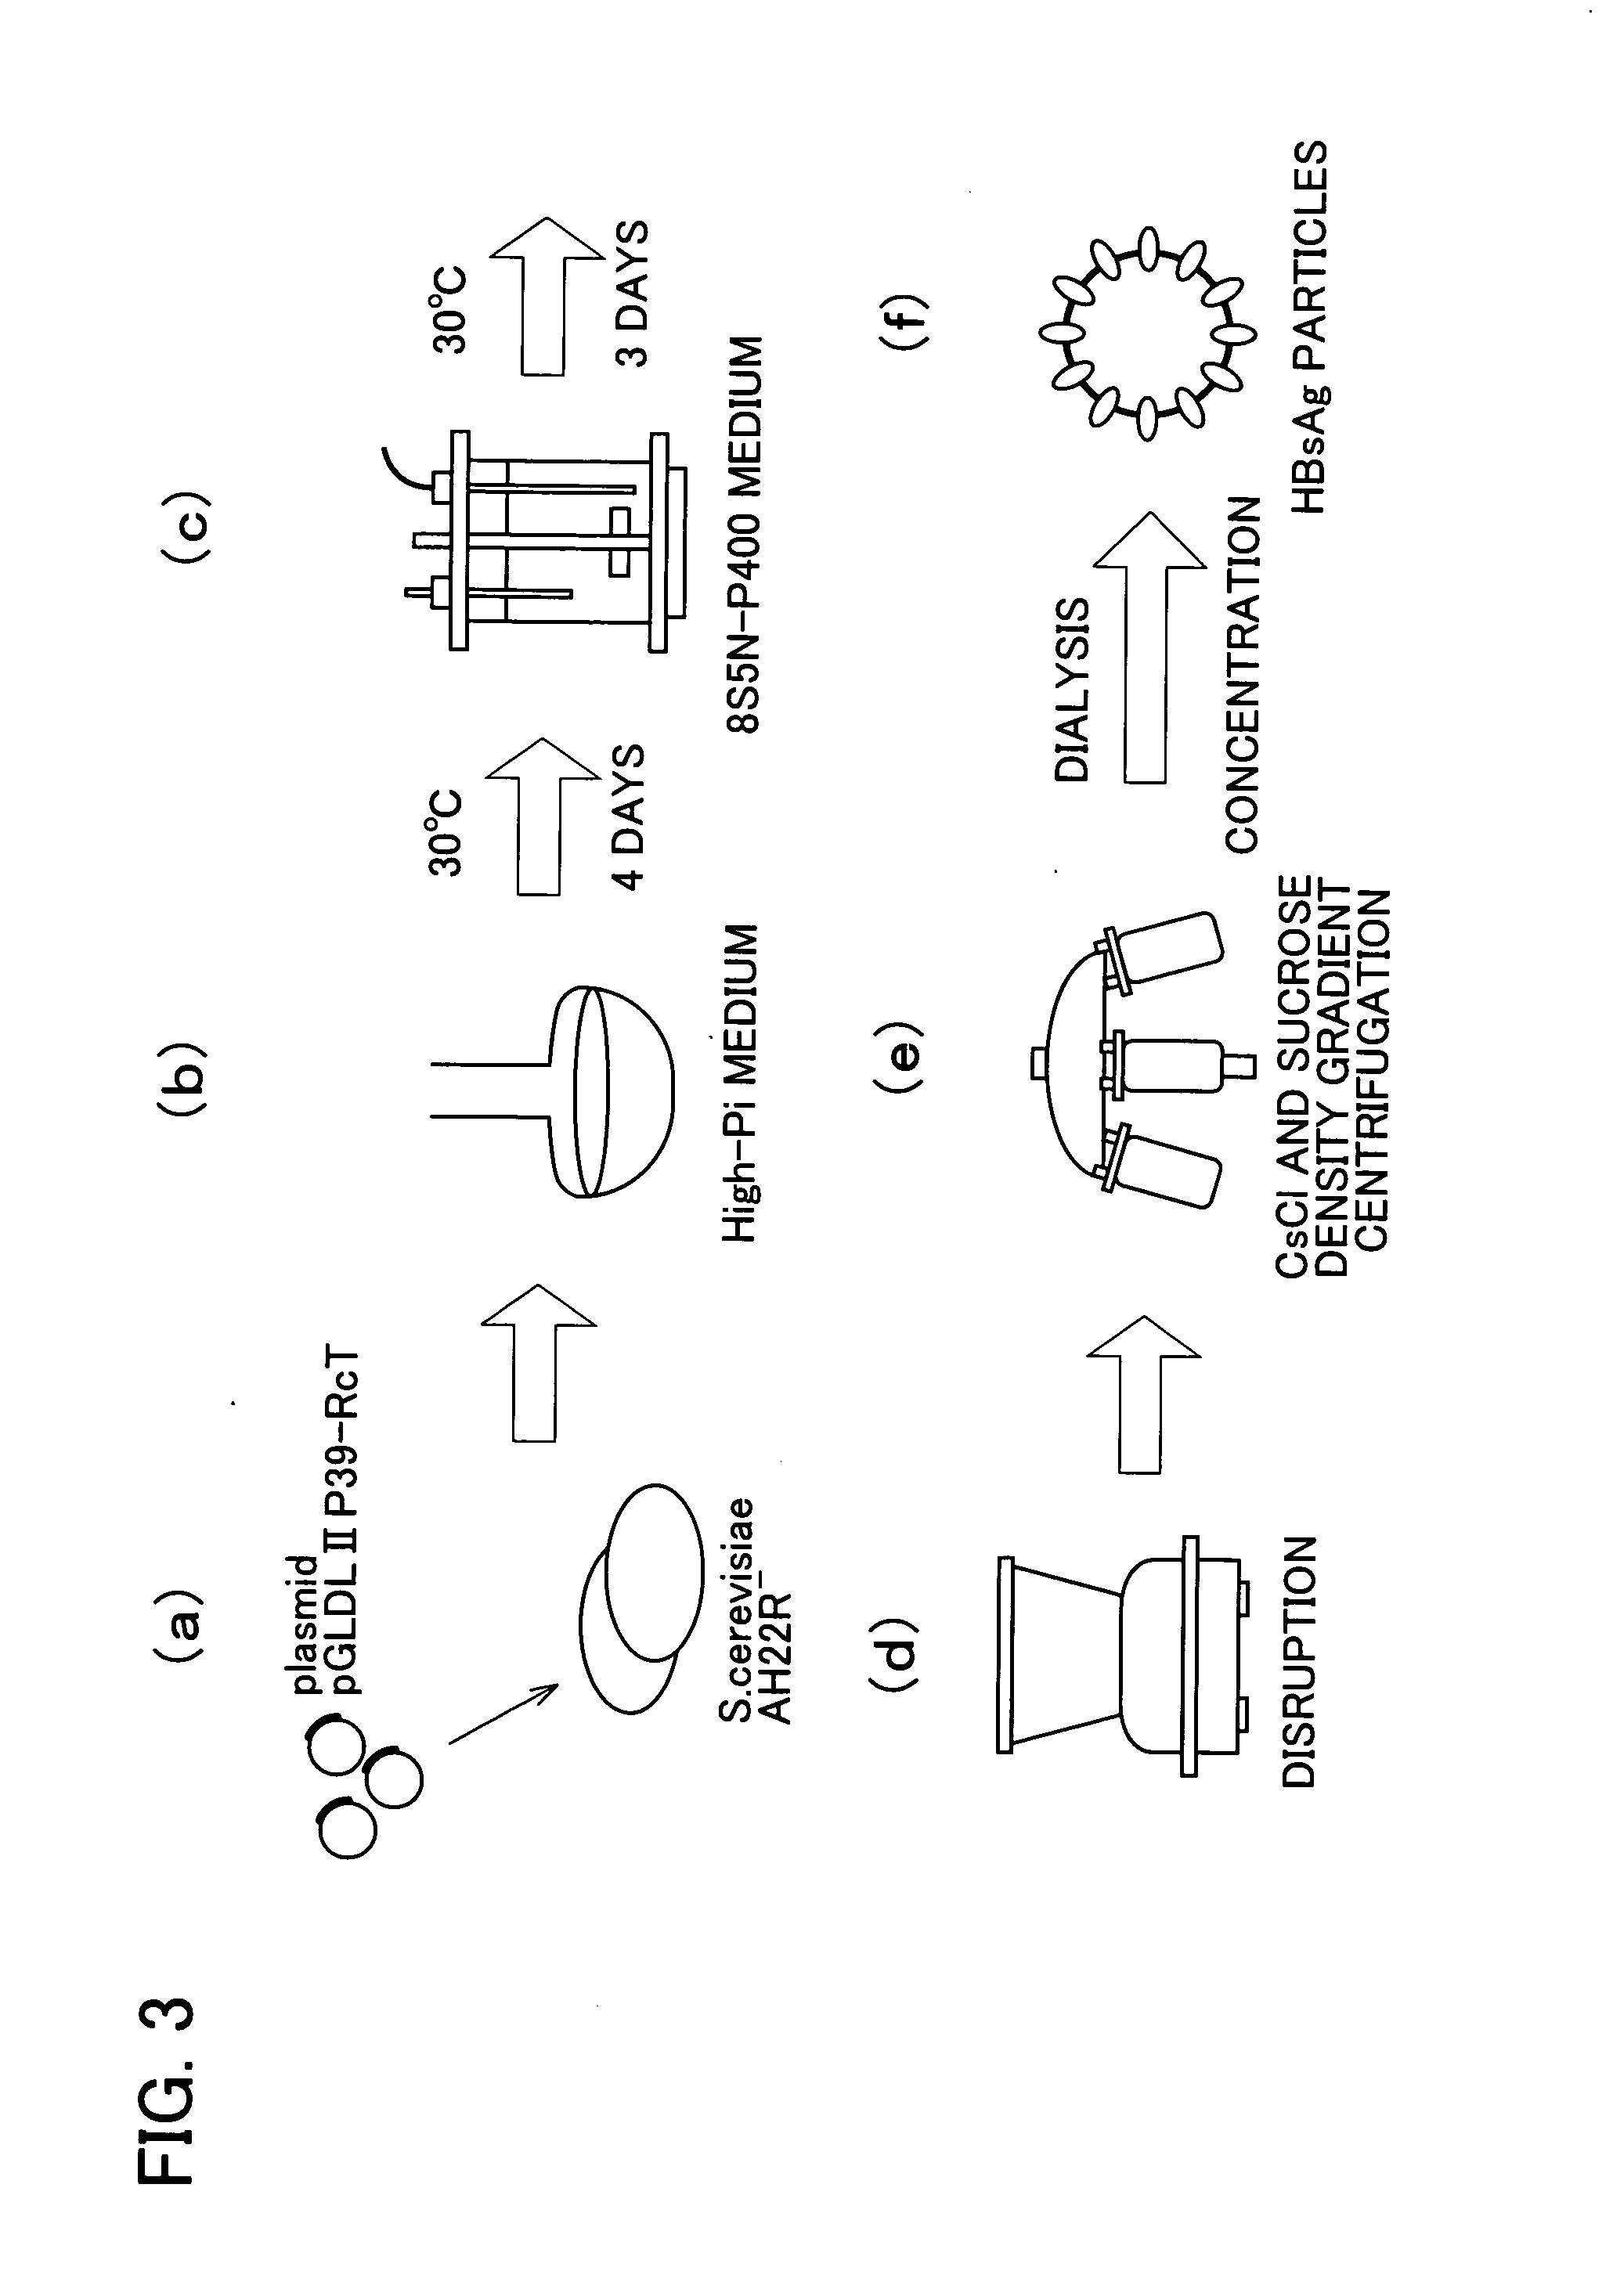 Drugs comprising protein forming hollow nanoparticles and therapeutic substance to be transferred into cells fused therewith